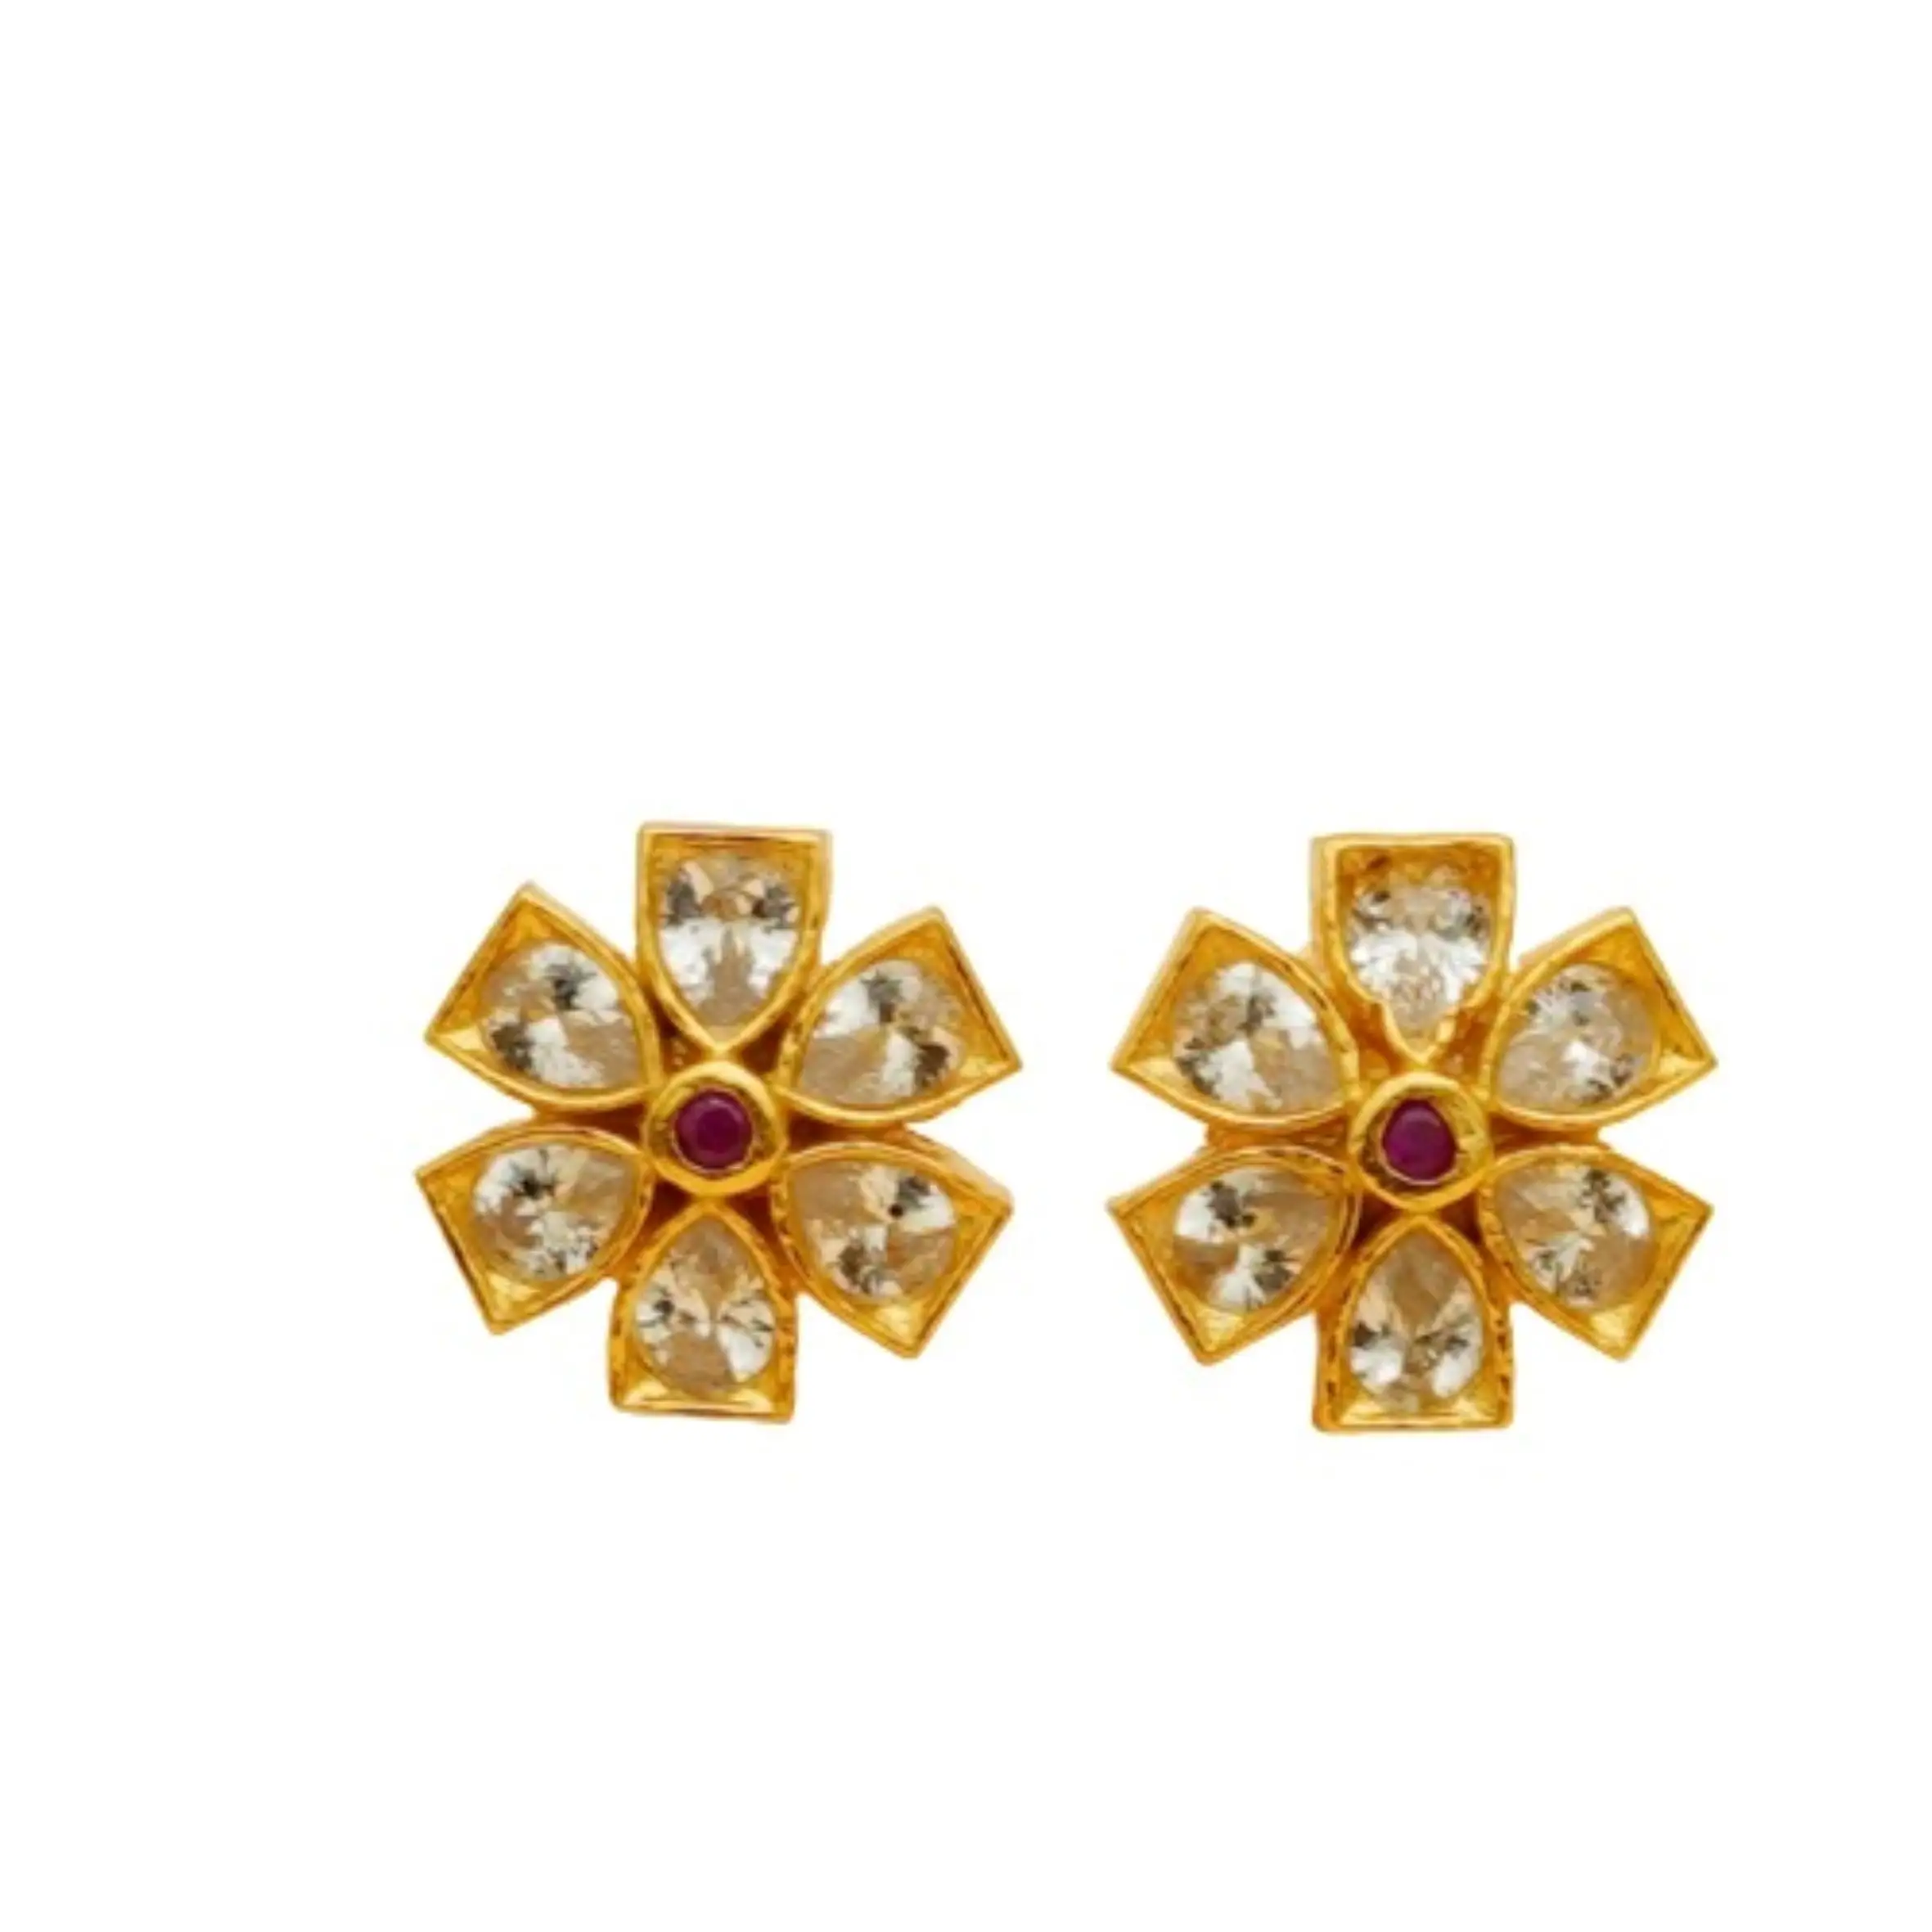 Magnificence Flowers Motifs 22 Karat Gold Plated Stud Crafted in White Red Stone Women Earring for Daily Wear at Wholesale Price